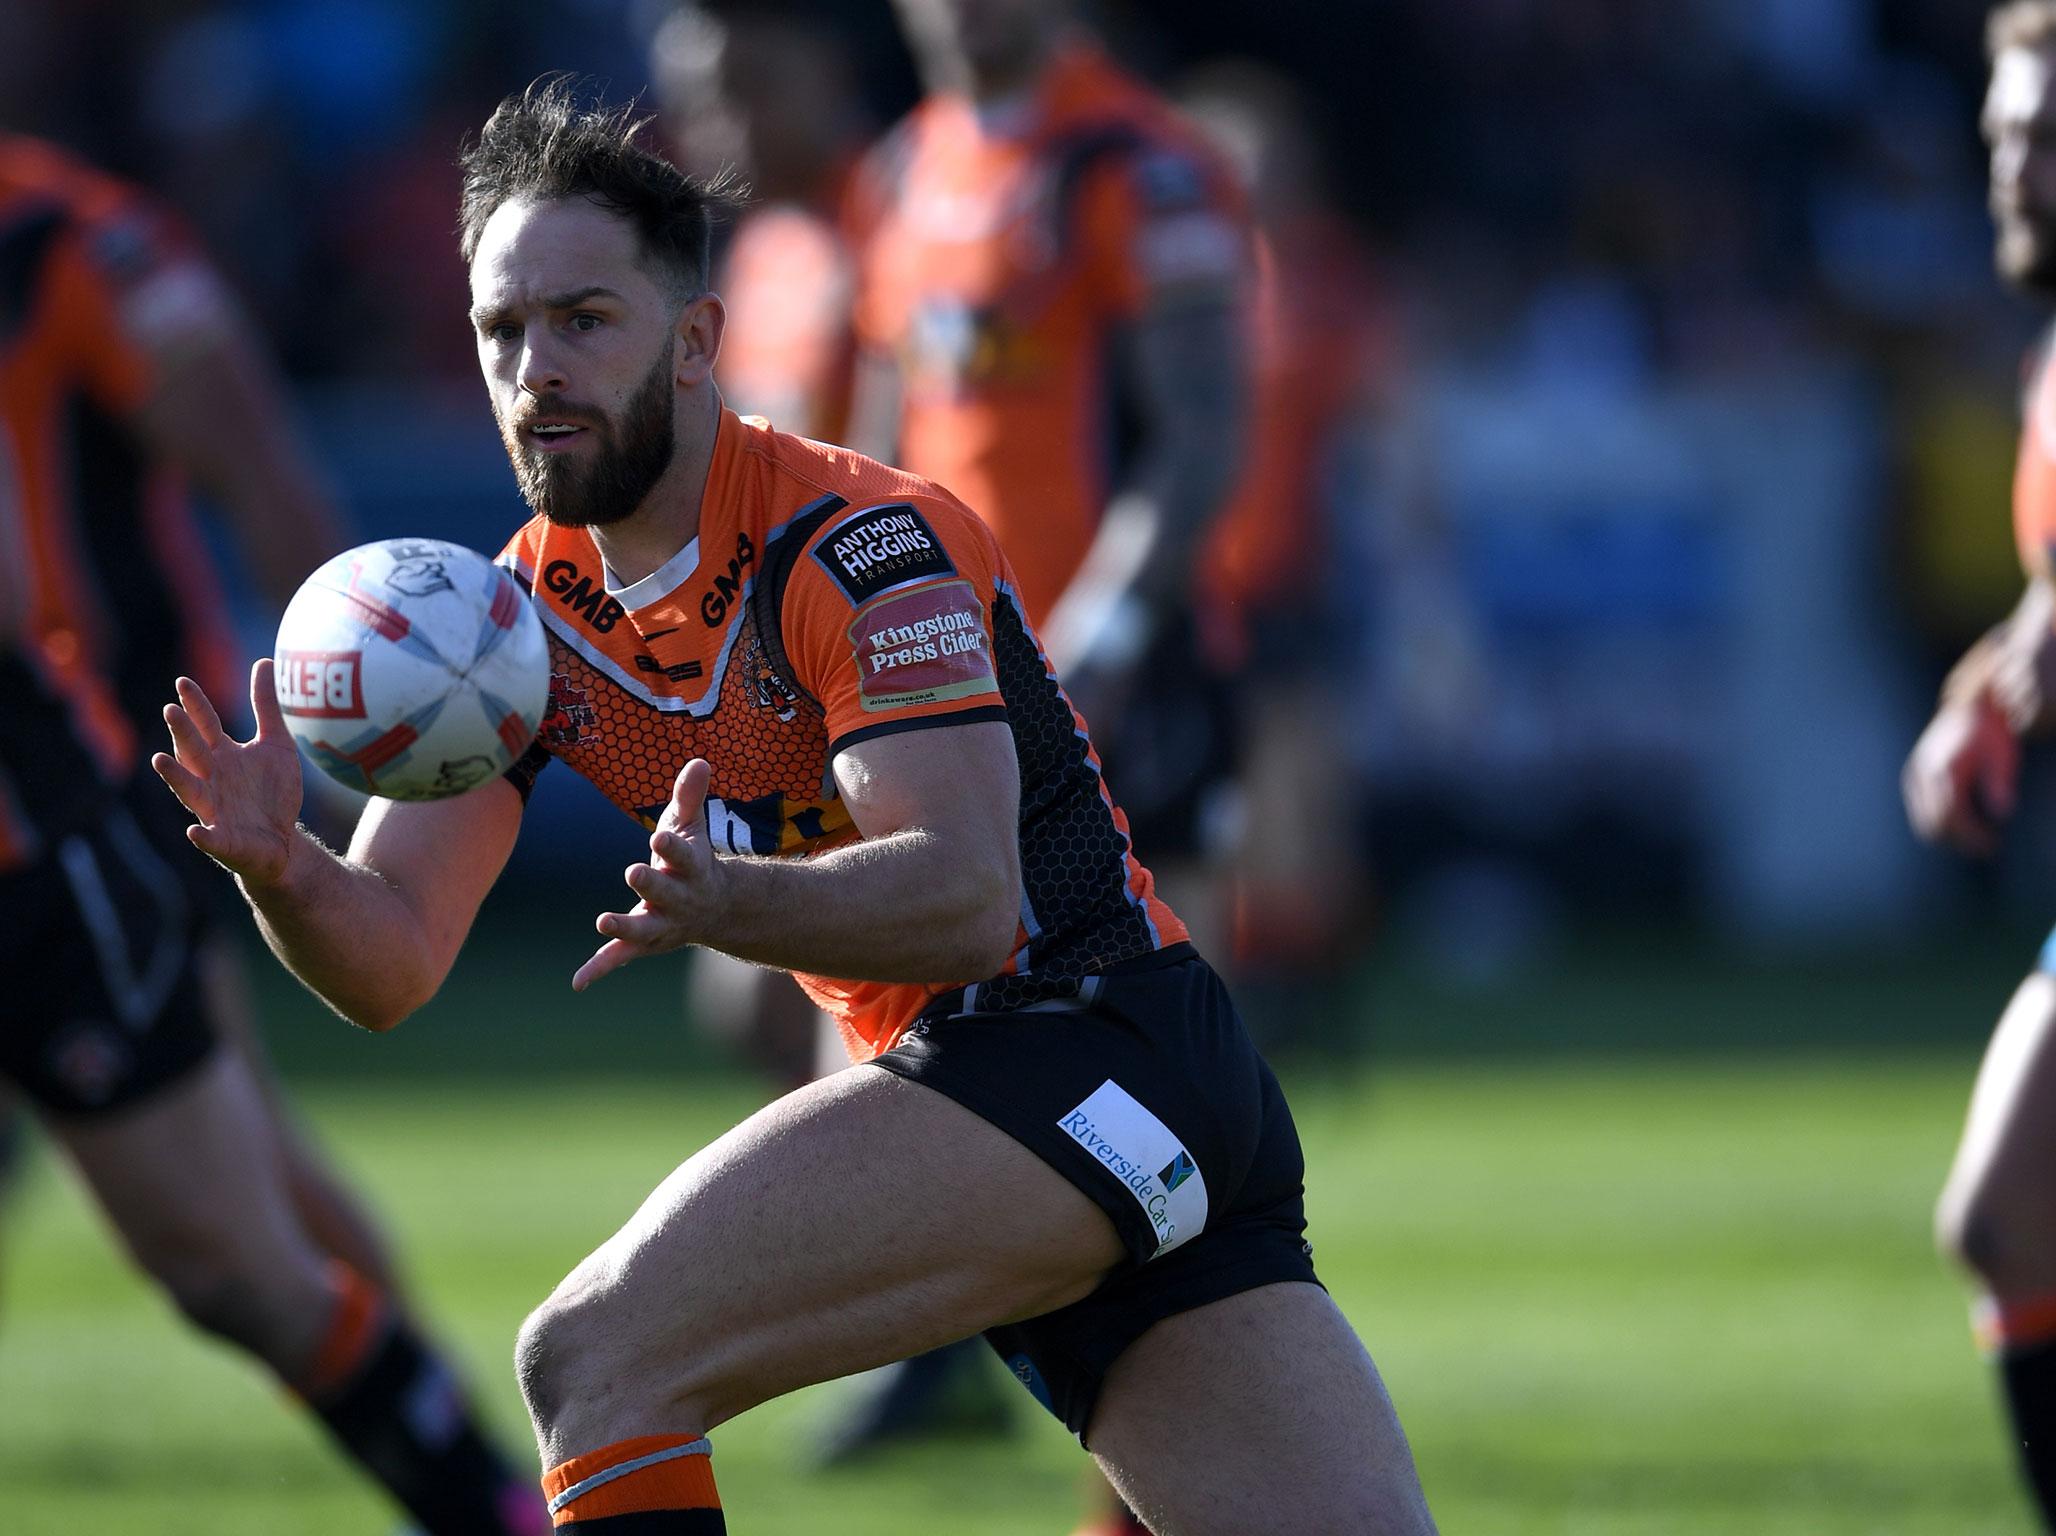 Gale was outstanding this season as the Tigers swept all before them in Super League